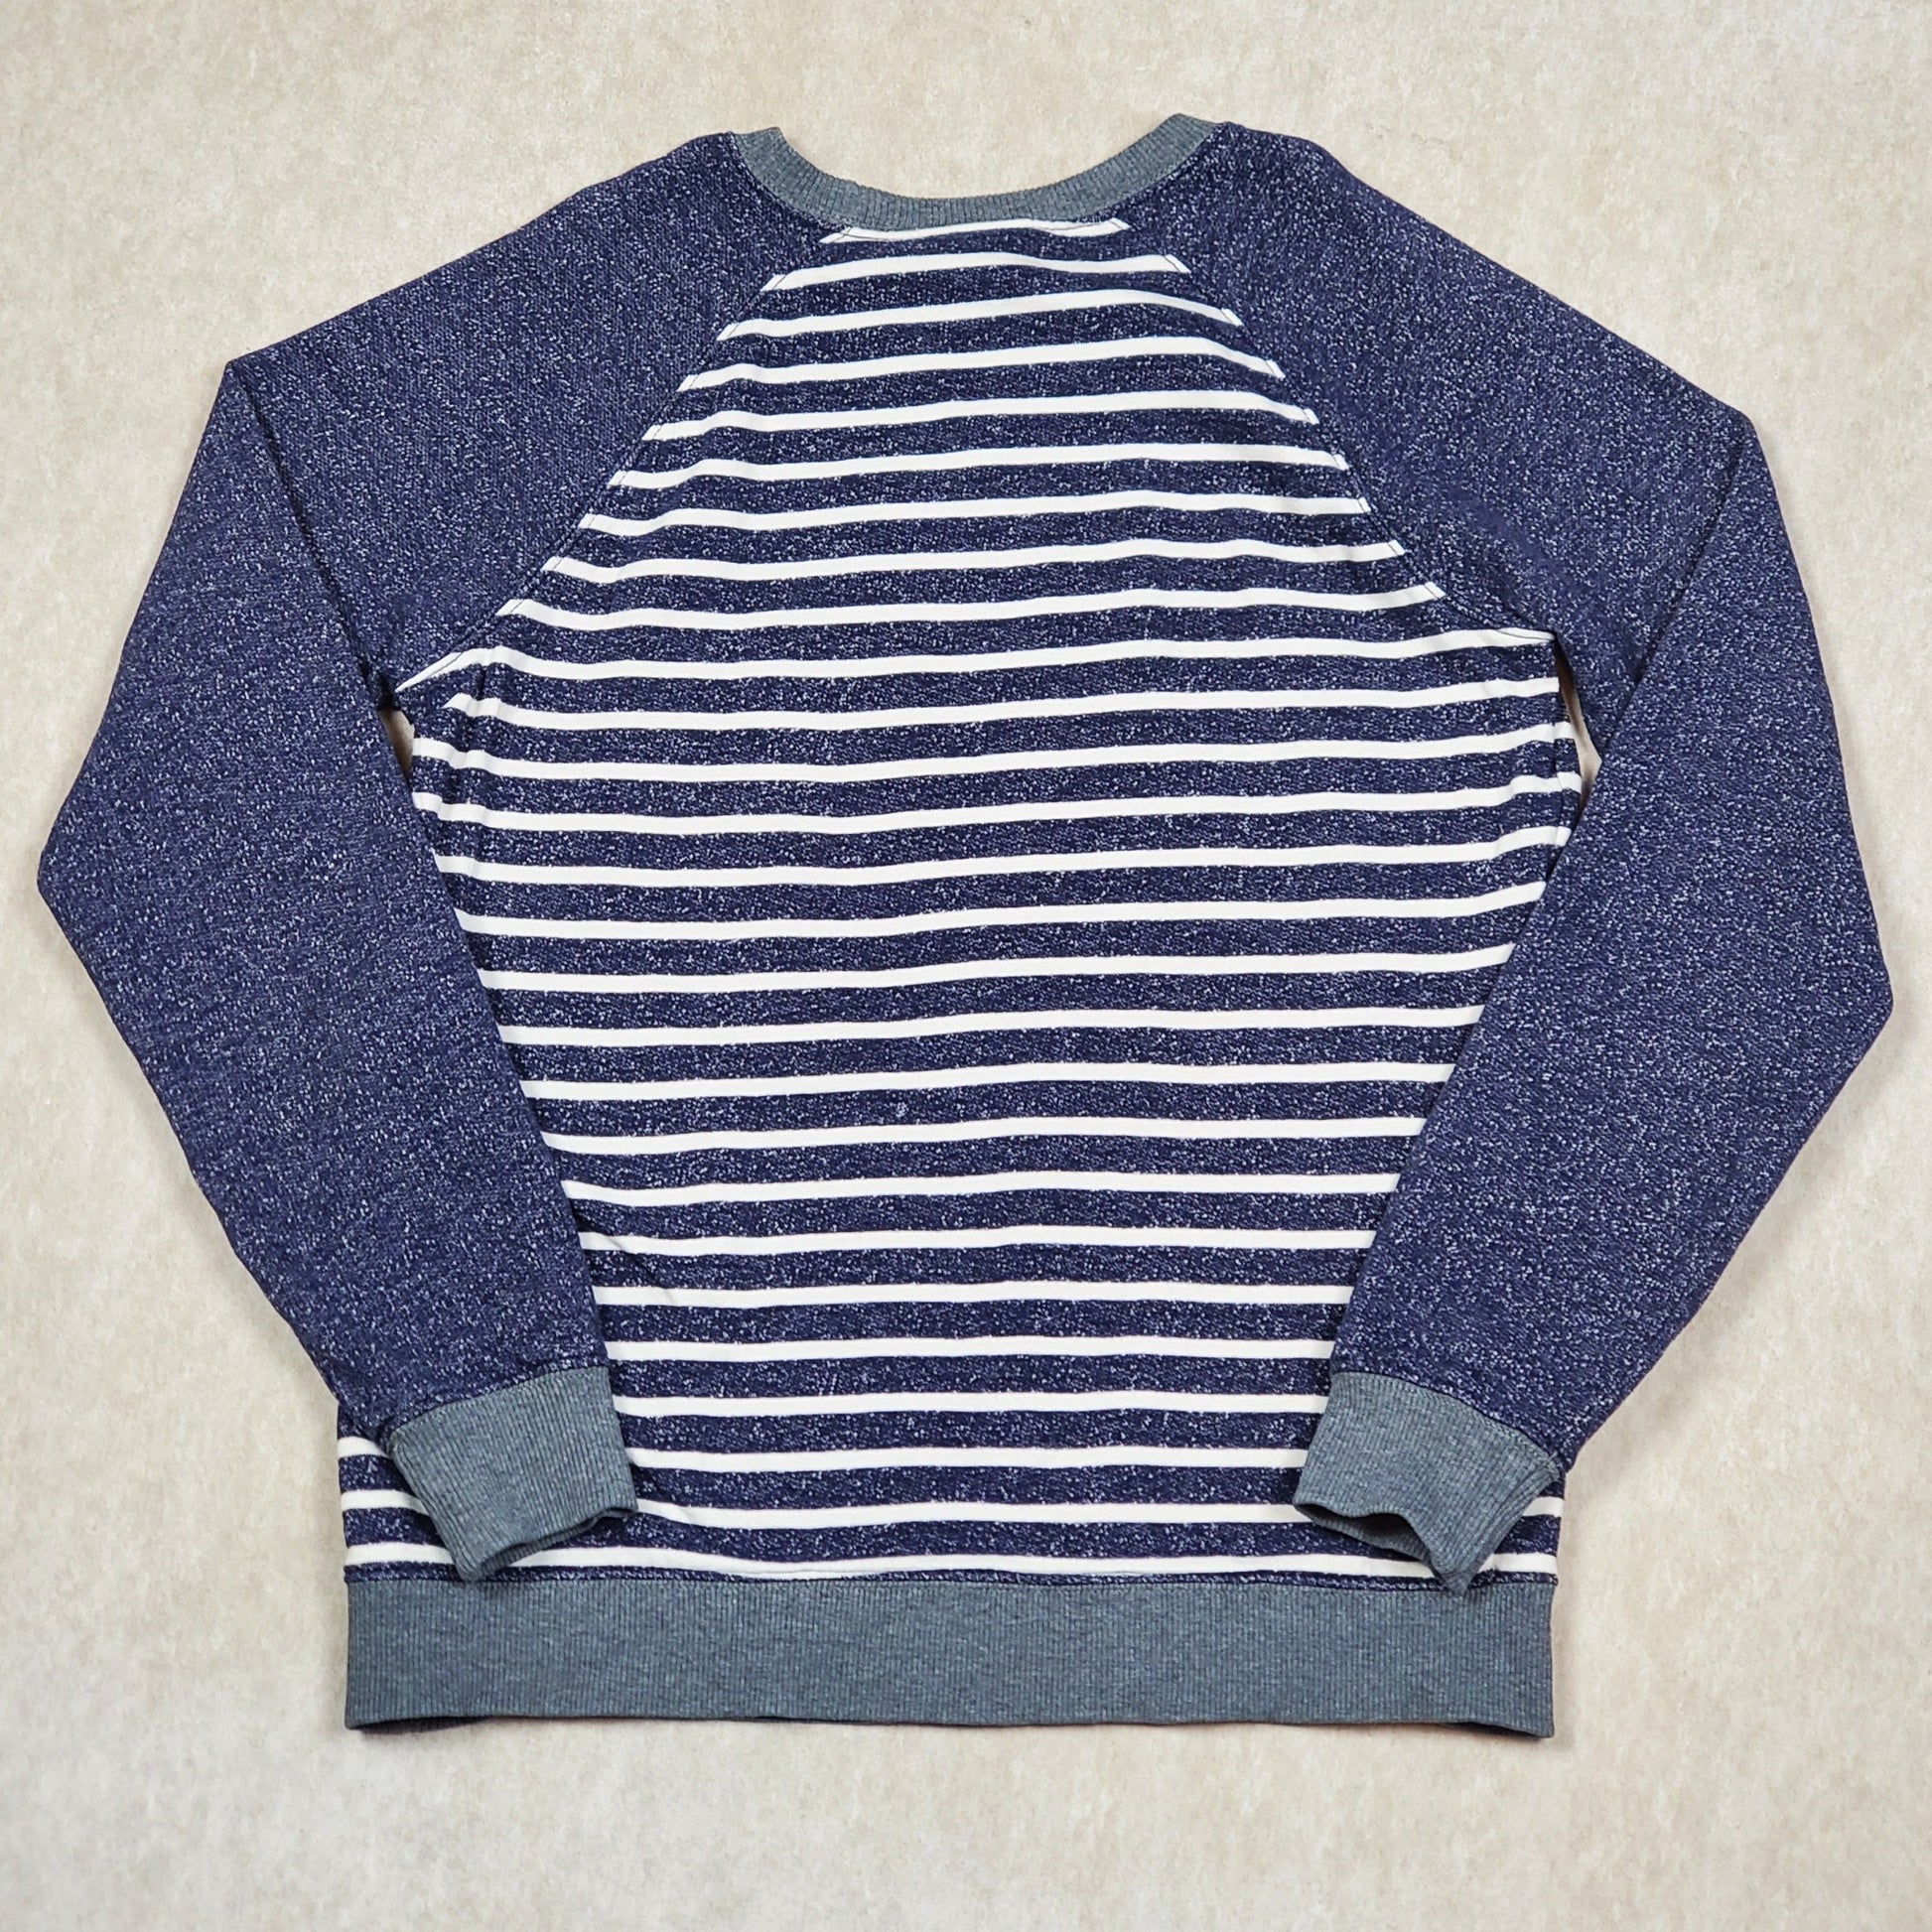 Hanna Andersson Boys Blue Striped Sweatshirt Size 12 Used View 3